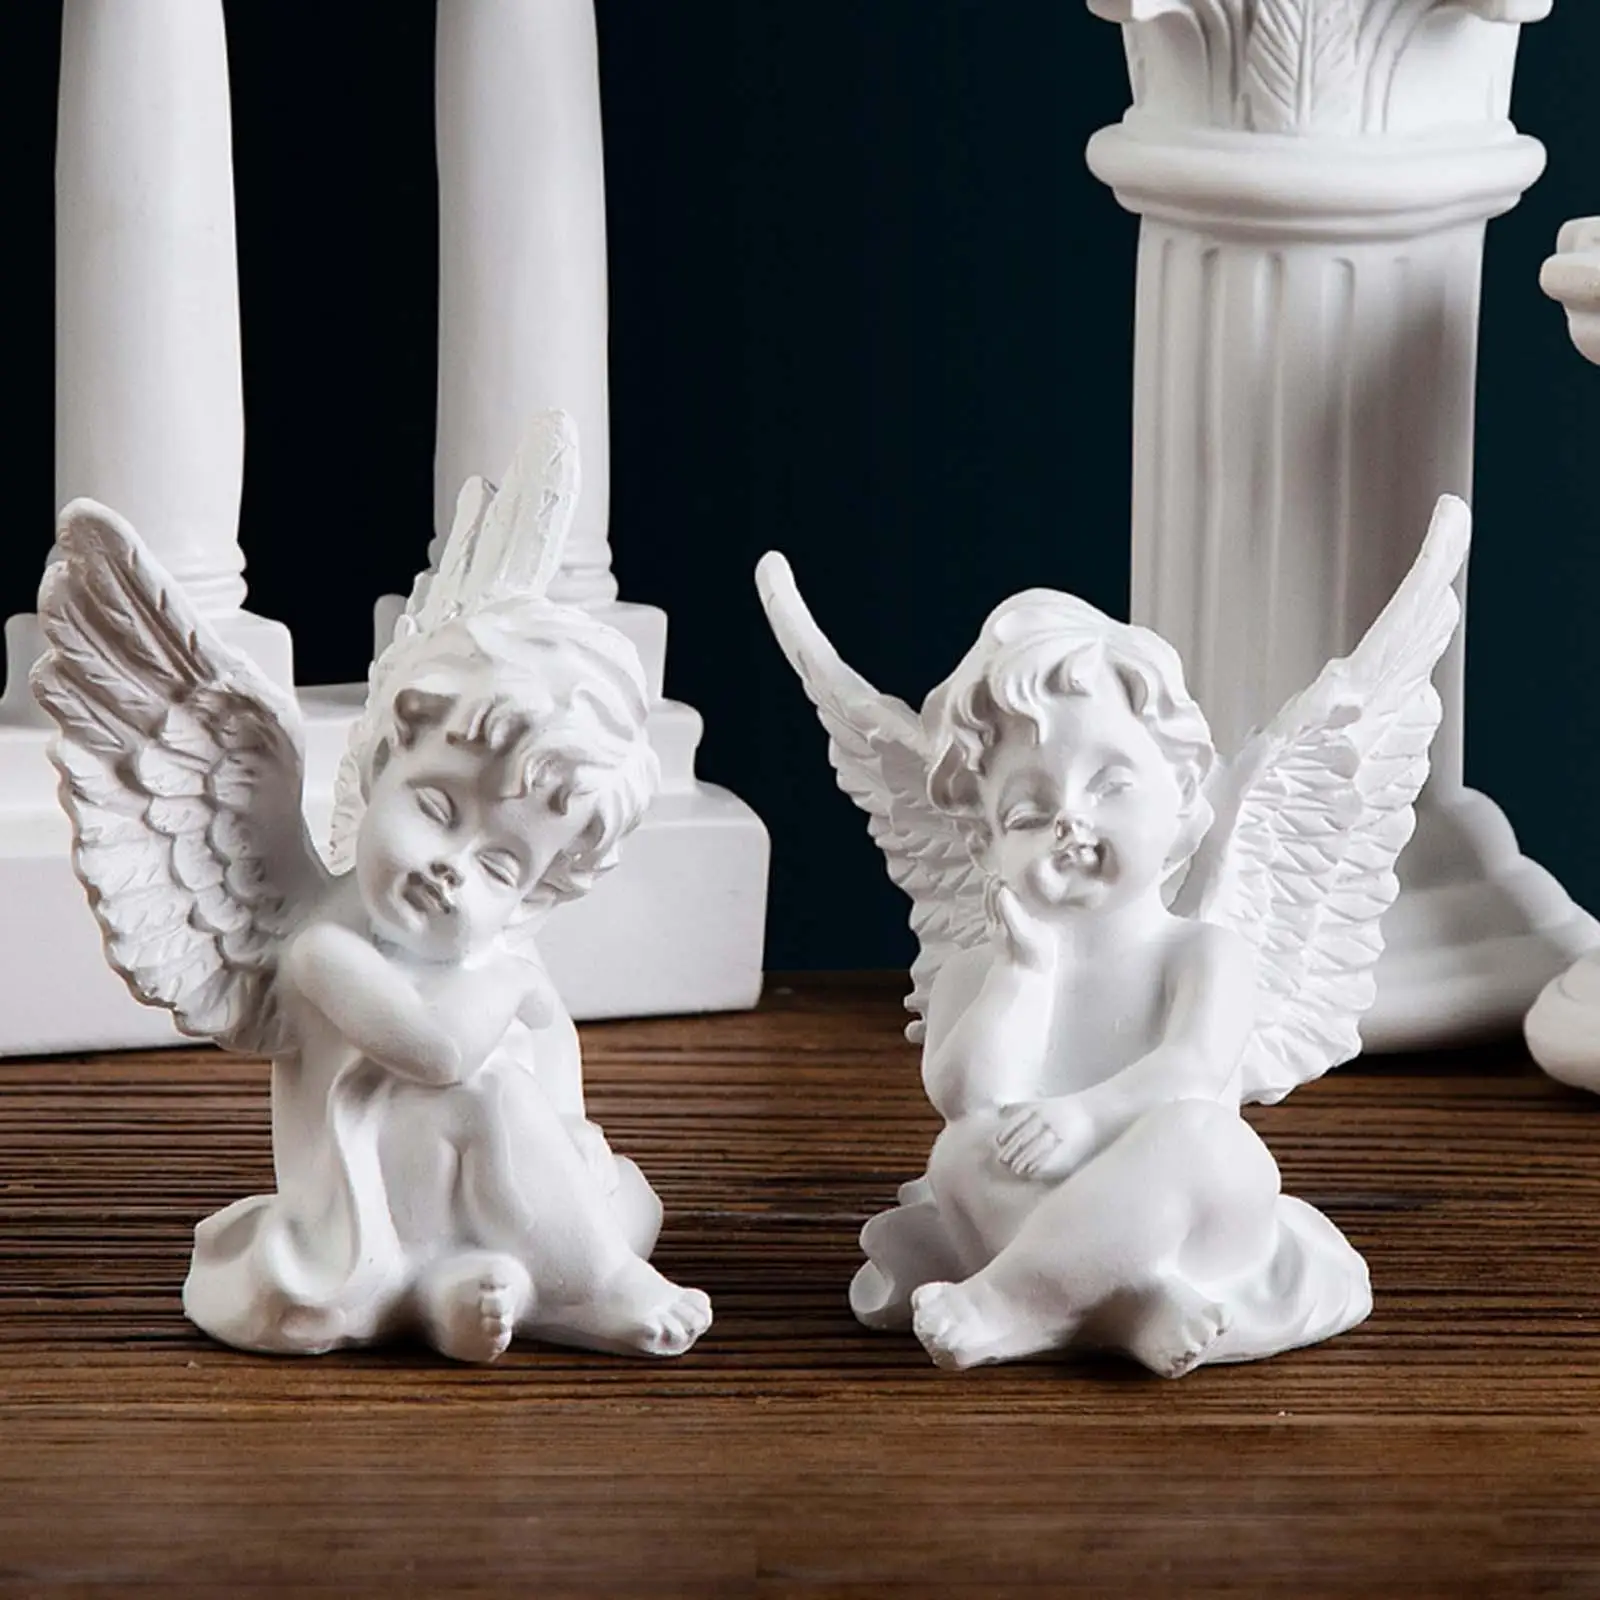 2 Pieces Cherubs Angels Statue Resin Christmas Small Decorative Art Ornaments for Tabletop Entryway Home Decor Porch Living Room